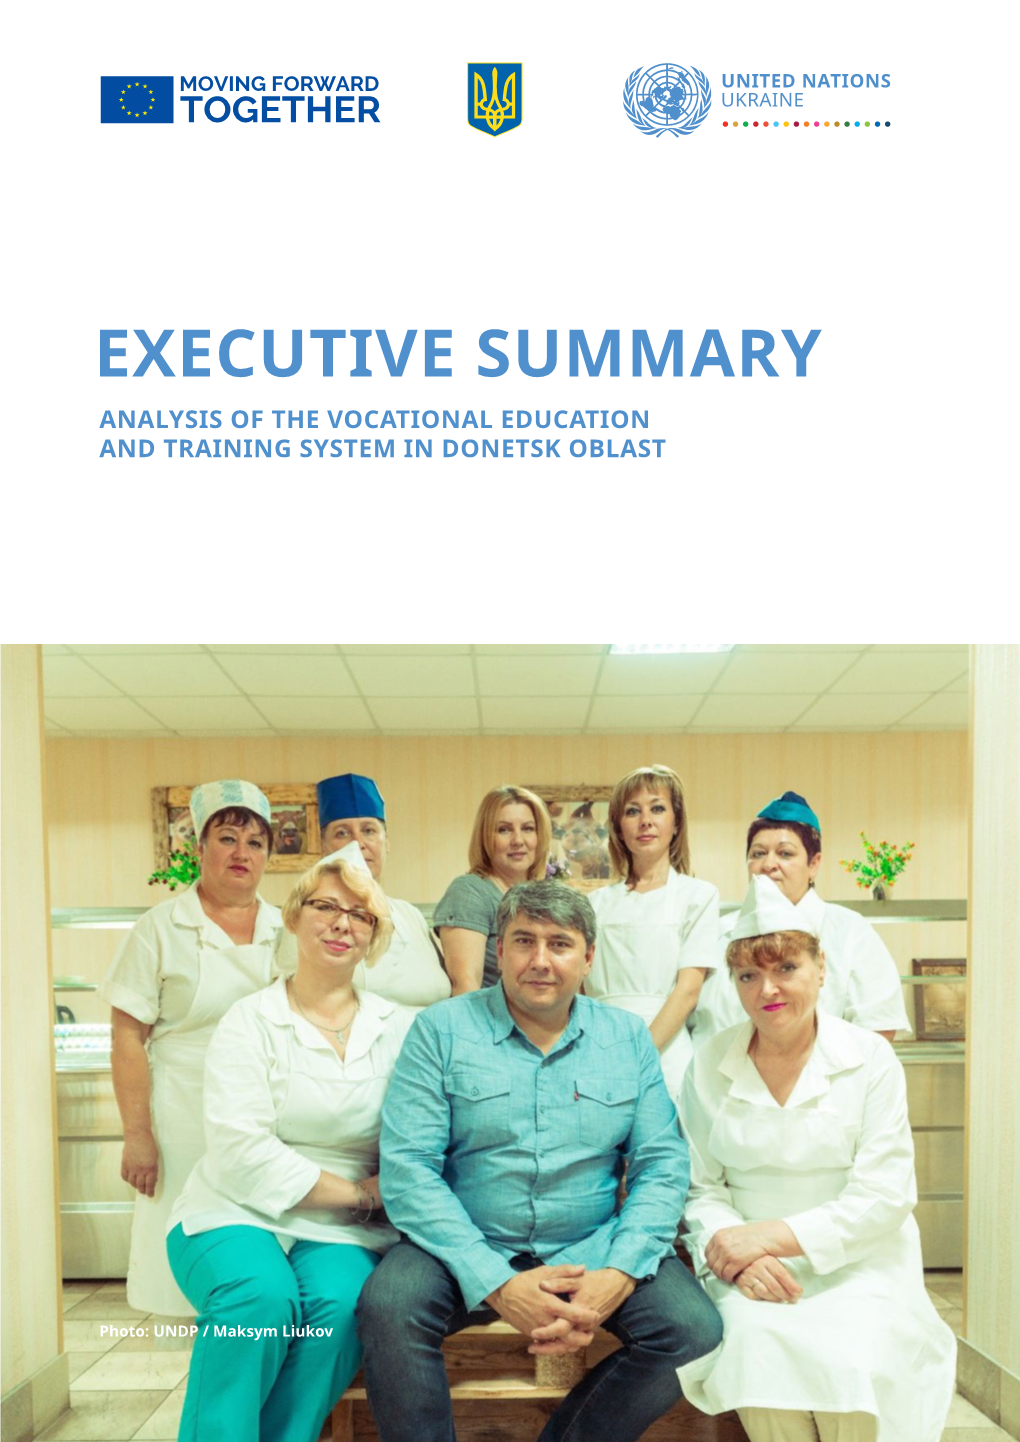 Executive Summary Analysis of the Vocational Education and Training System in Donetsk Oblast